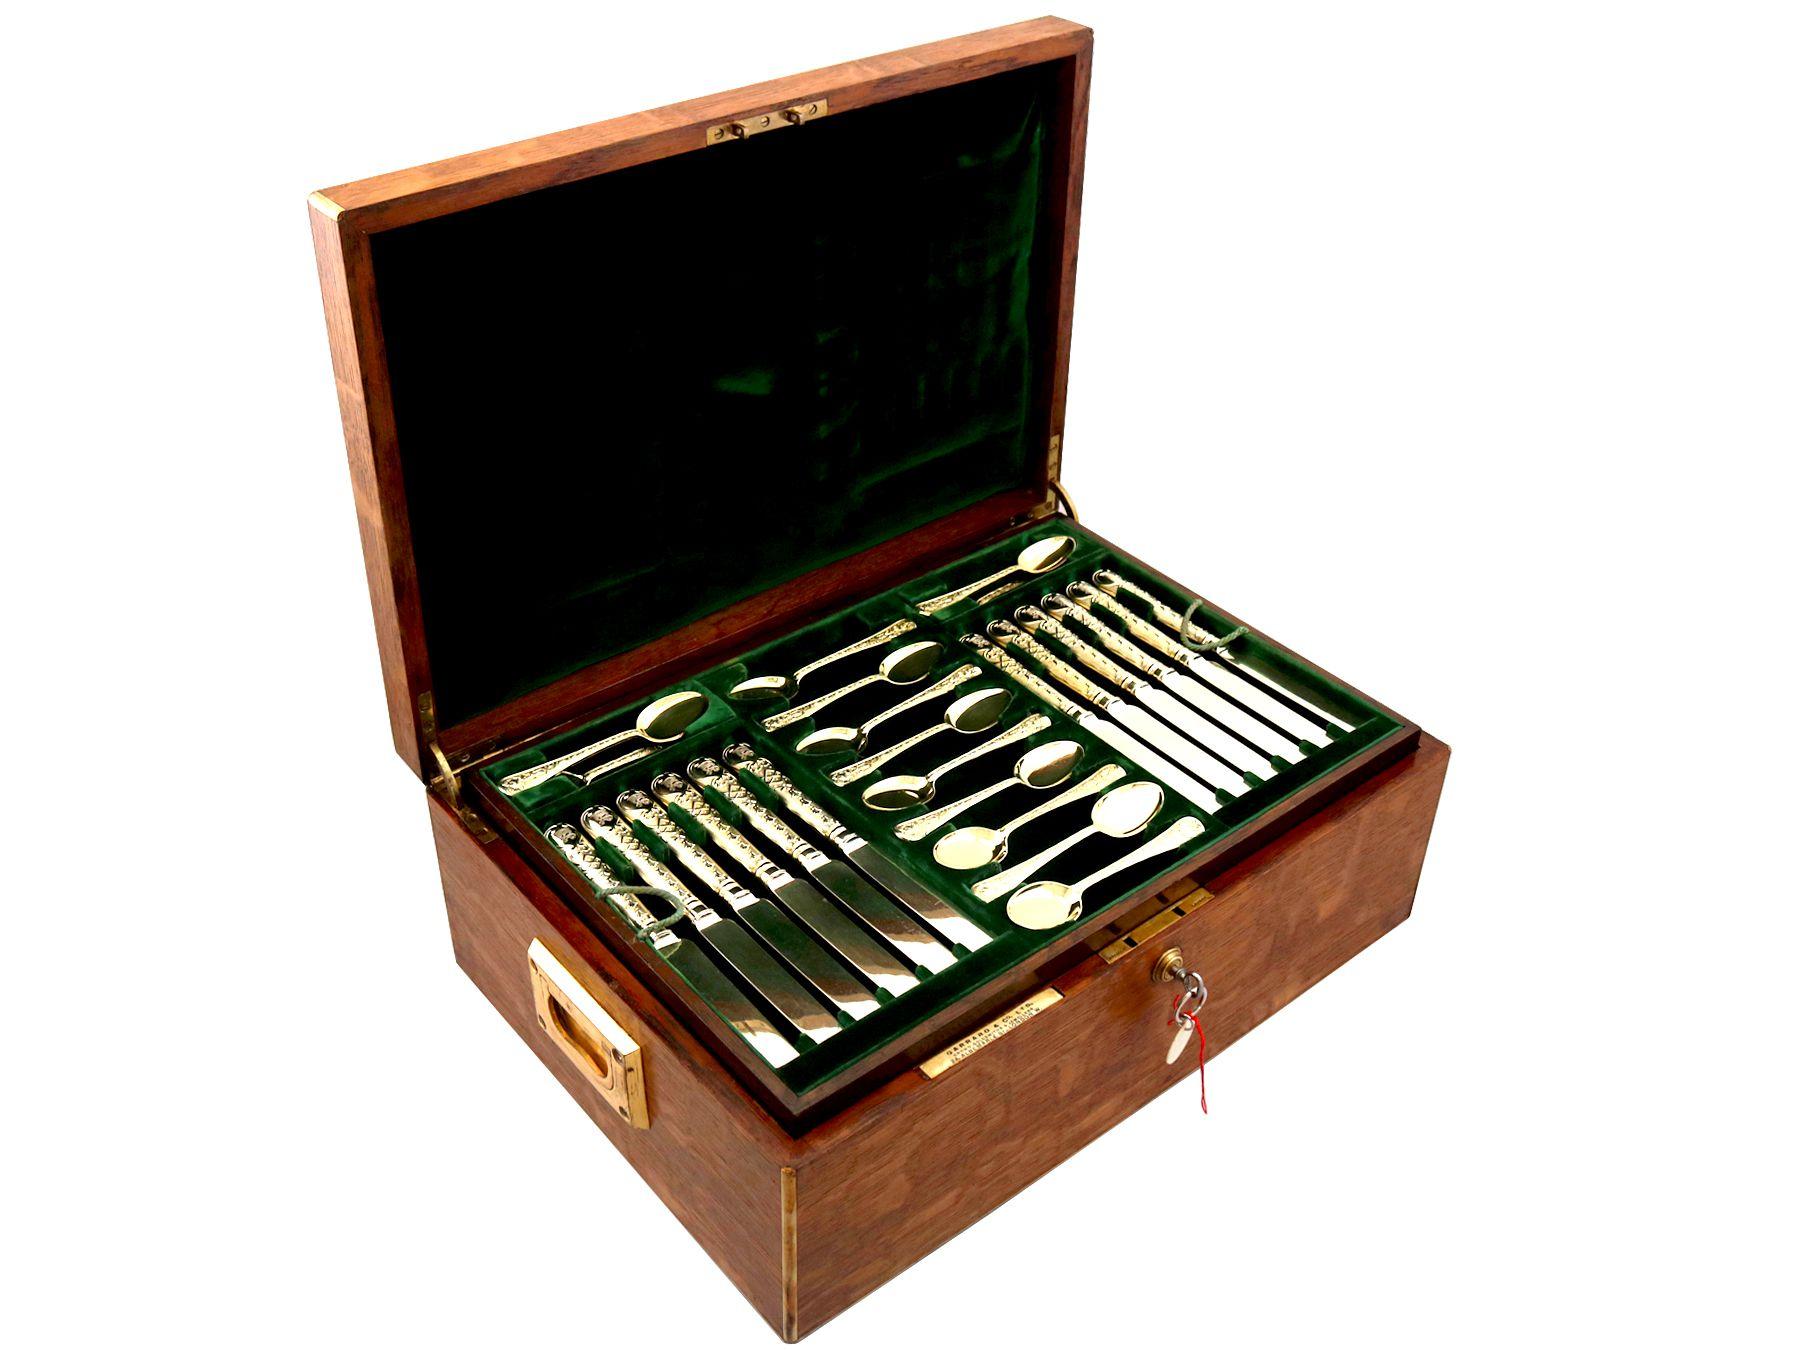 A magnificent, fine and impressive antique early 20th century English sterling silver gilt Elizabethen II pattern flatware service for twelve persons - boxed; an addition to our canteen of cutlery collection.

The pieces of this magnificent,